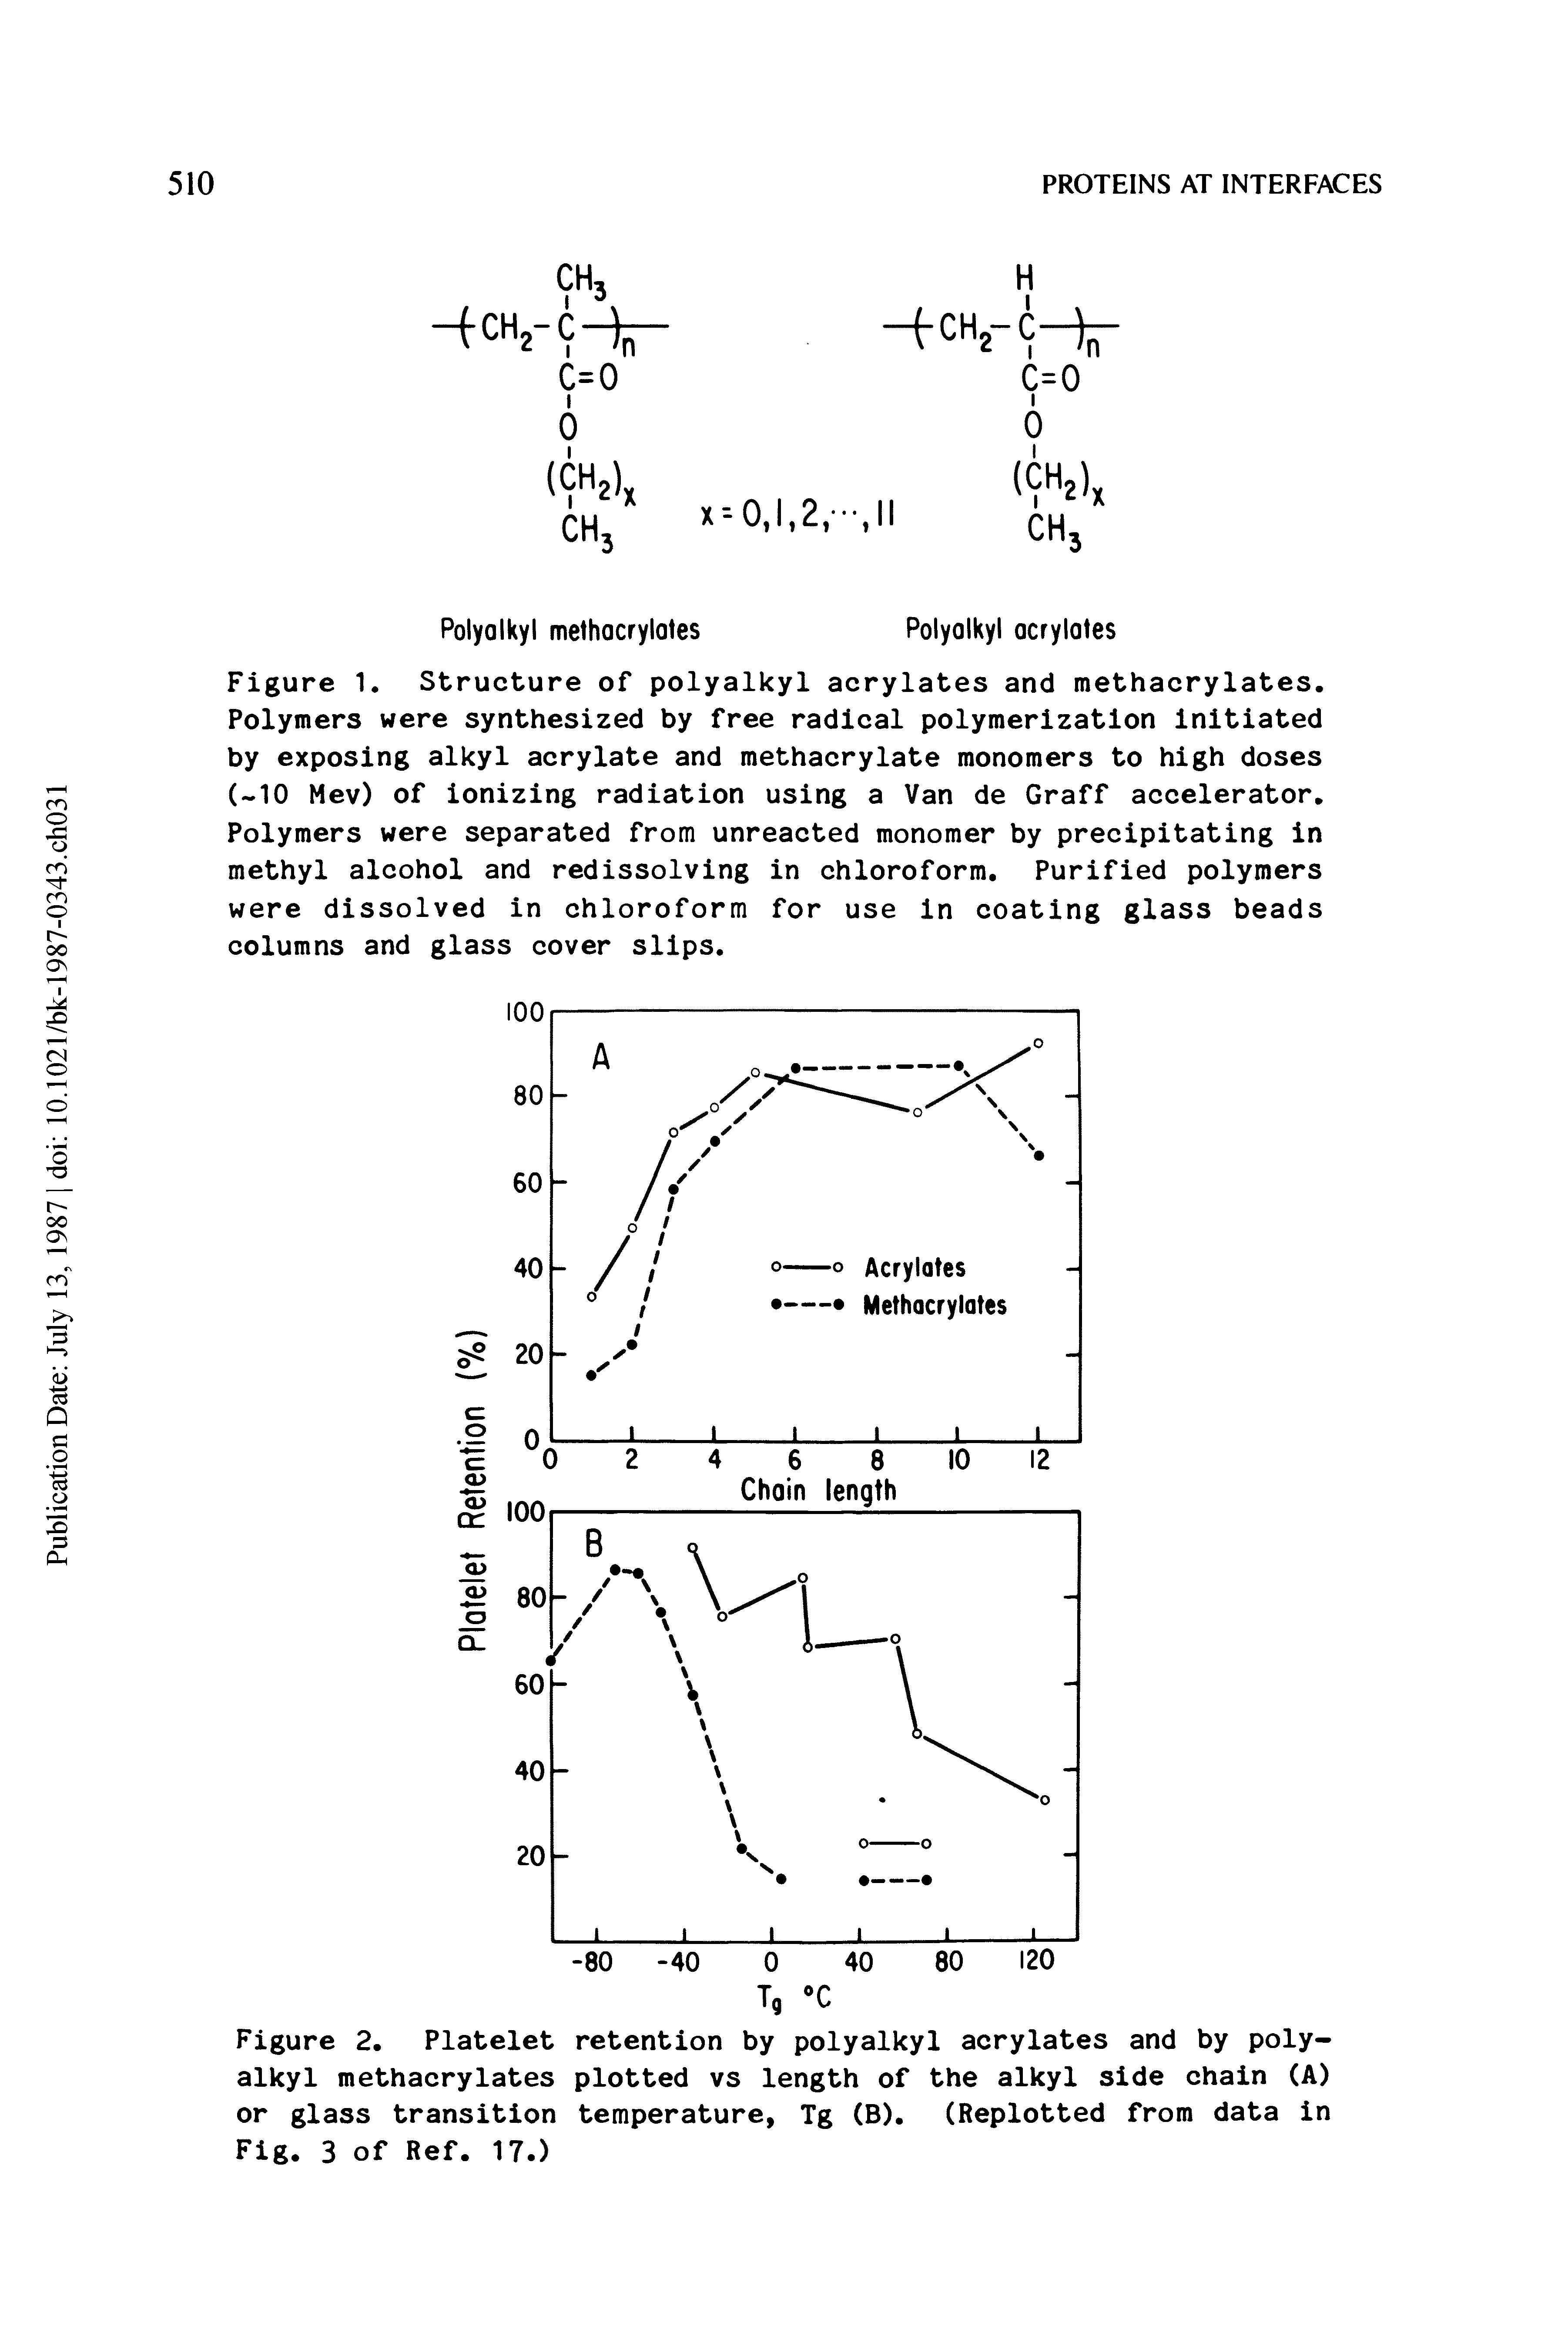 Figure K Structure of polyalkyl acrylates and methacrylates. Polymers were synthesized by free radical polymerization Initiated by exposing alkyl acrylate and methacrylate monomers to high doses ( 10 Mev) of ionizing radiation using a Van de Graff accelerator. Polymers were separated from unreacted monomer by precipitating in methyl alcohol and redissolving in chloroform. Purified polymers were dissolved in chloroform for use in coating glass beads columns and glass cover slips.